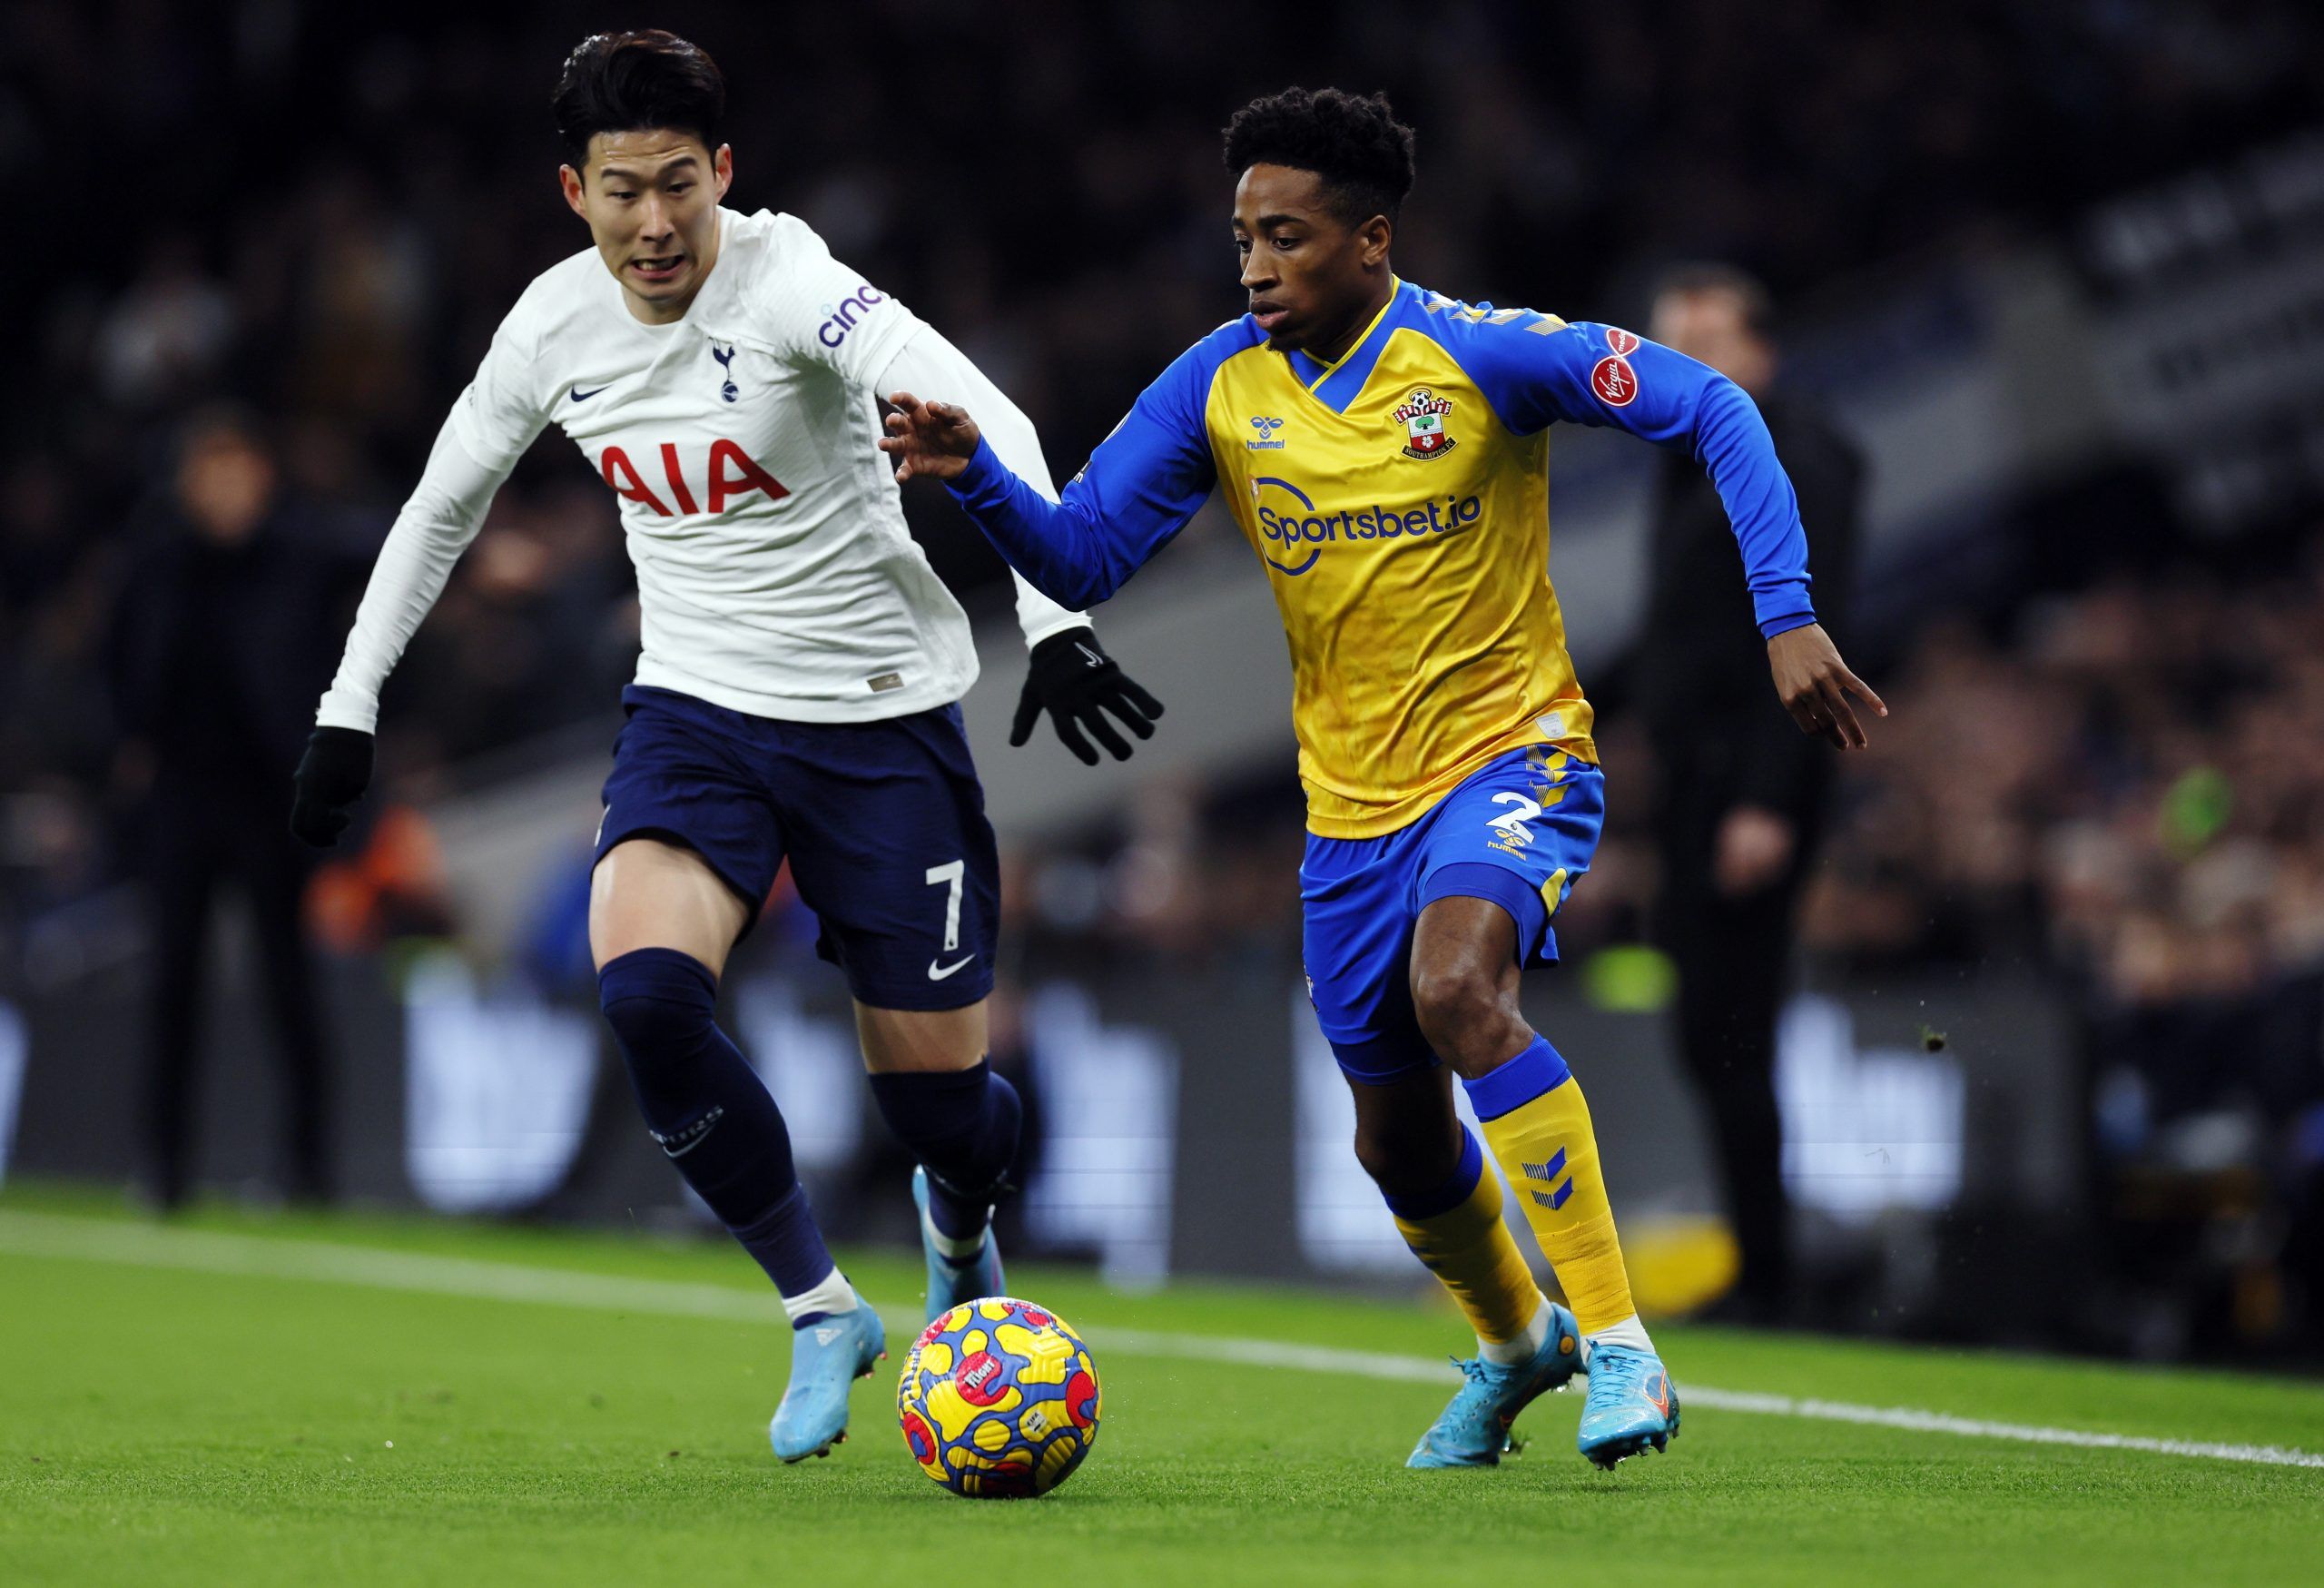 Southampton defender Kyle Walker-Peters in action against Spurs winger Heung-min Son